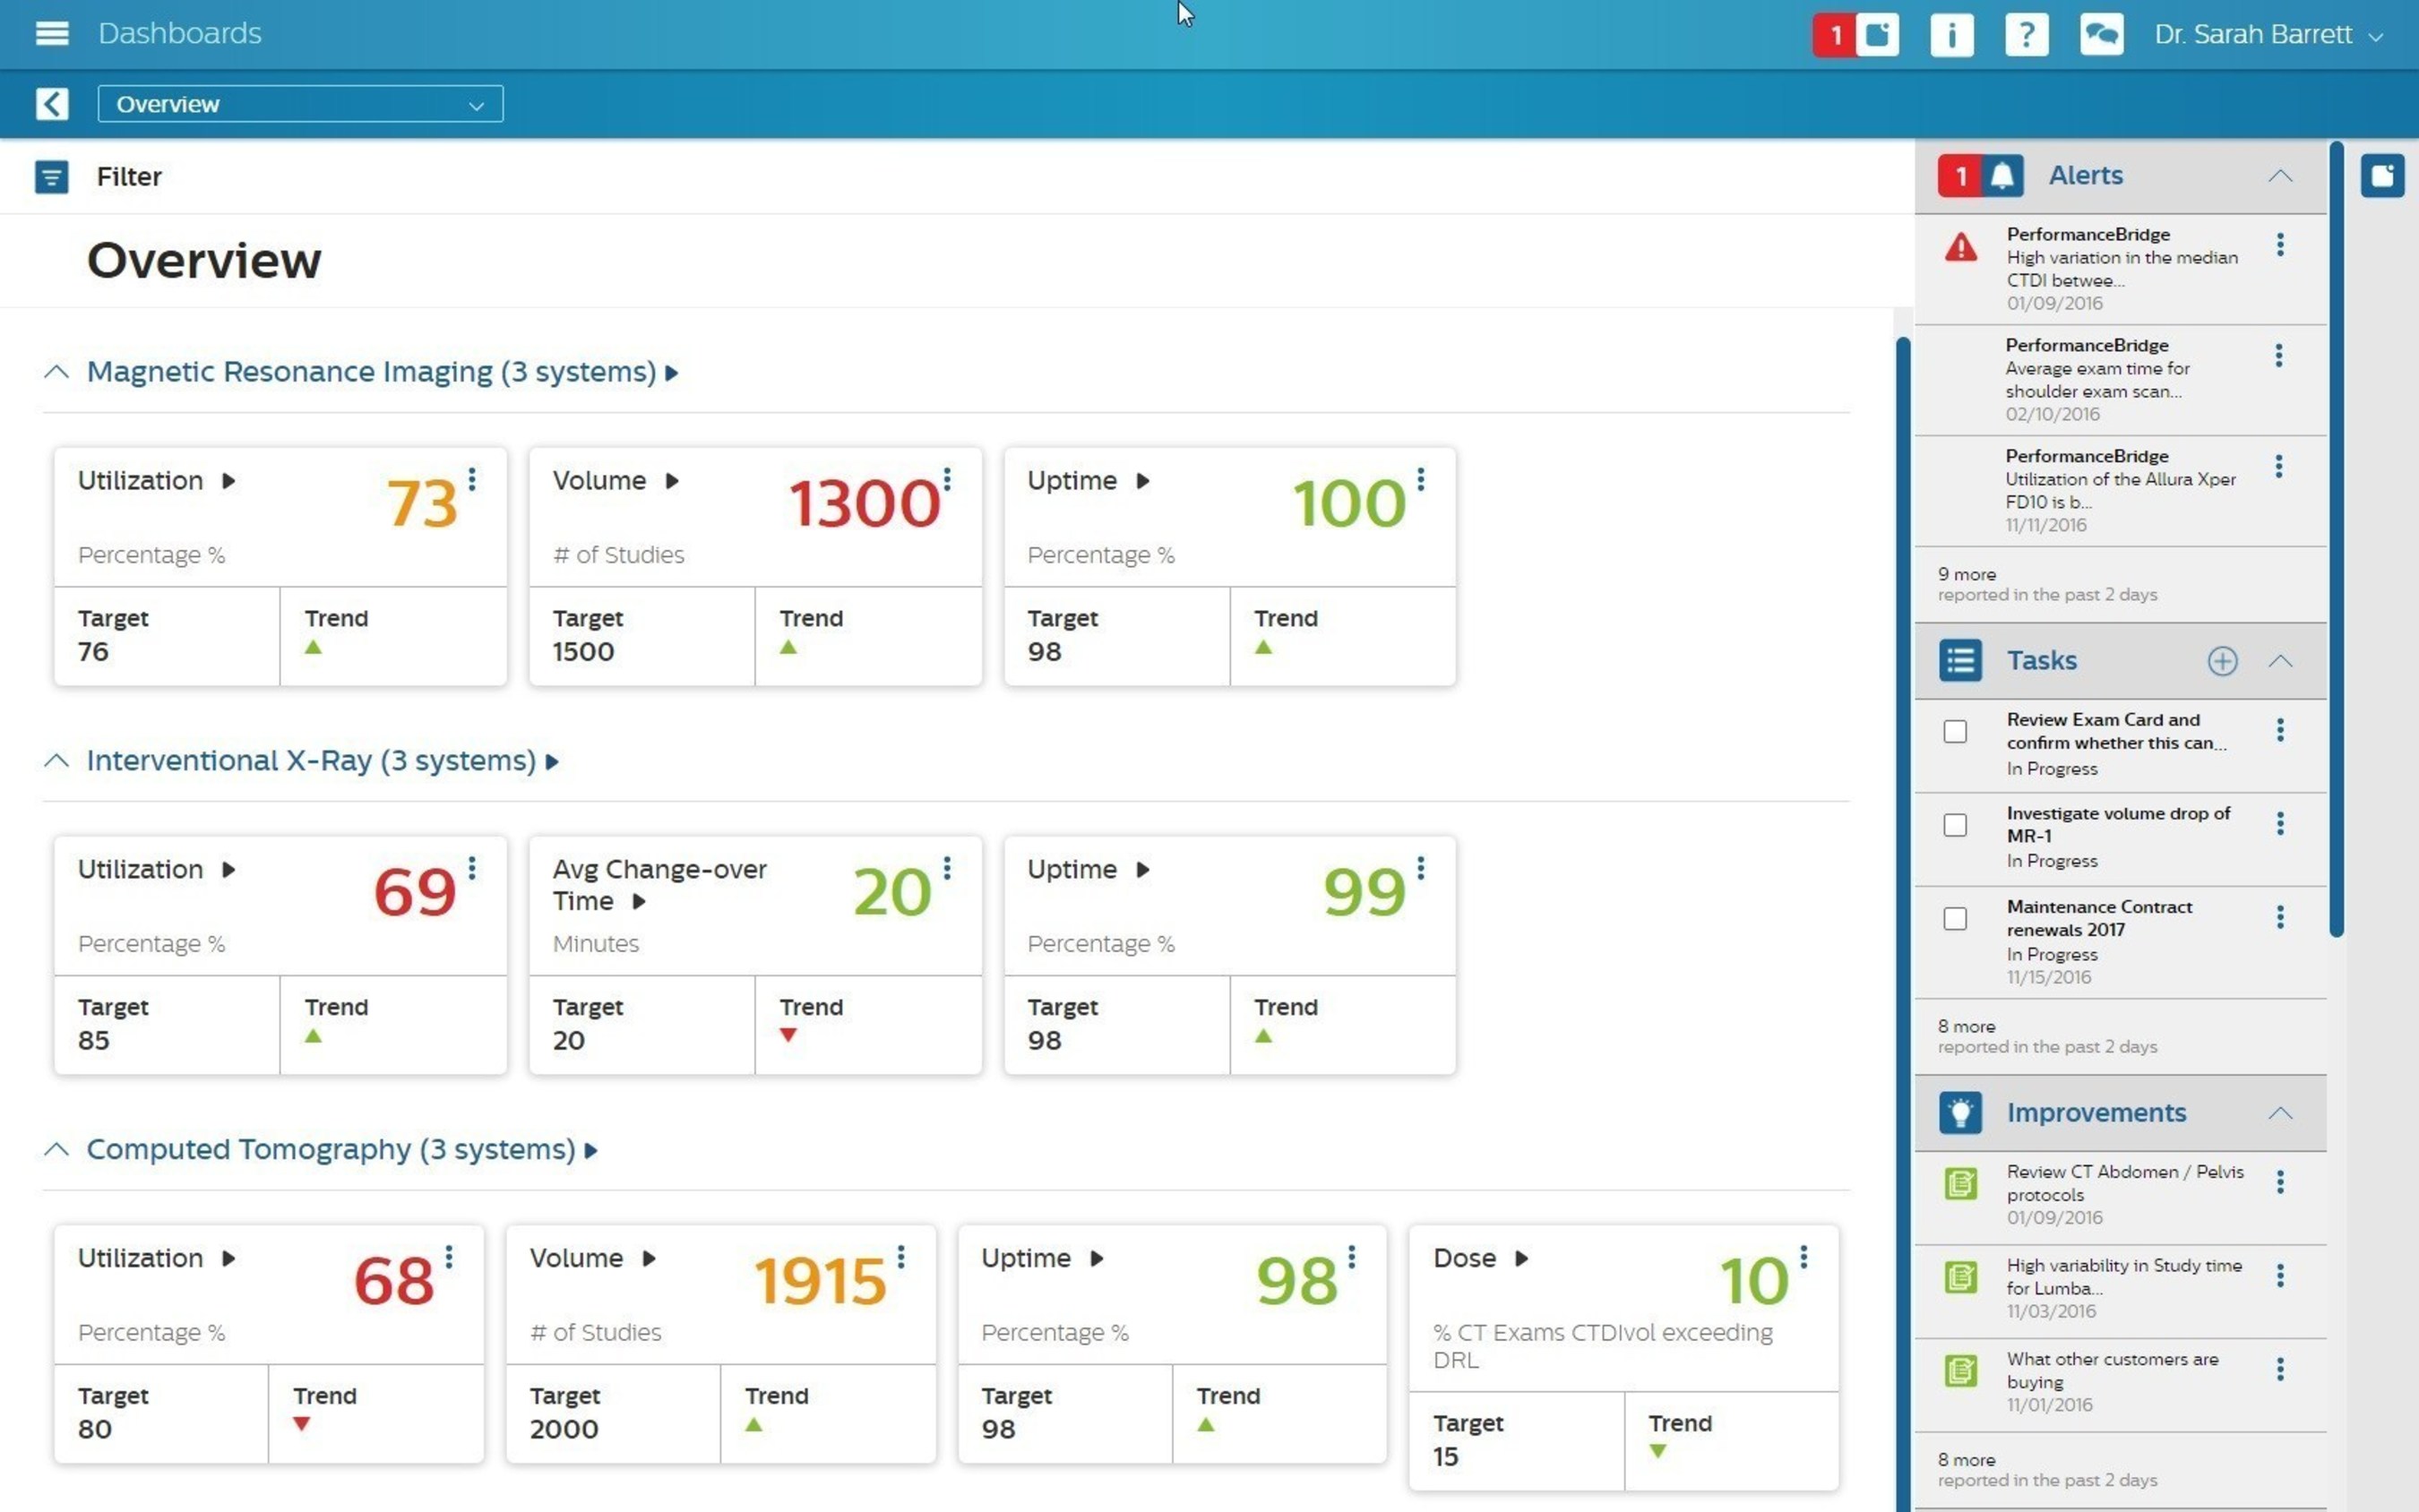 PerformanceBridge offers an integrated dashboard to manage your hospital department from one screen.